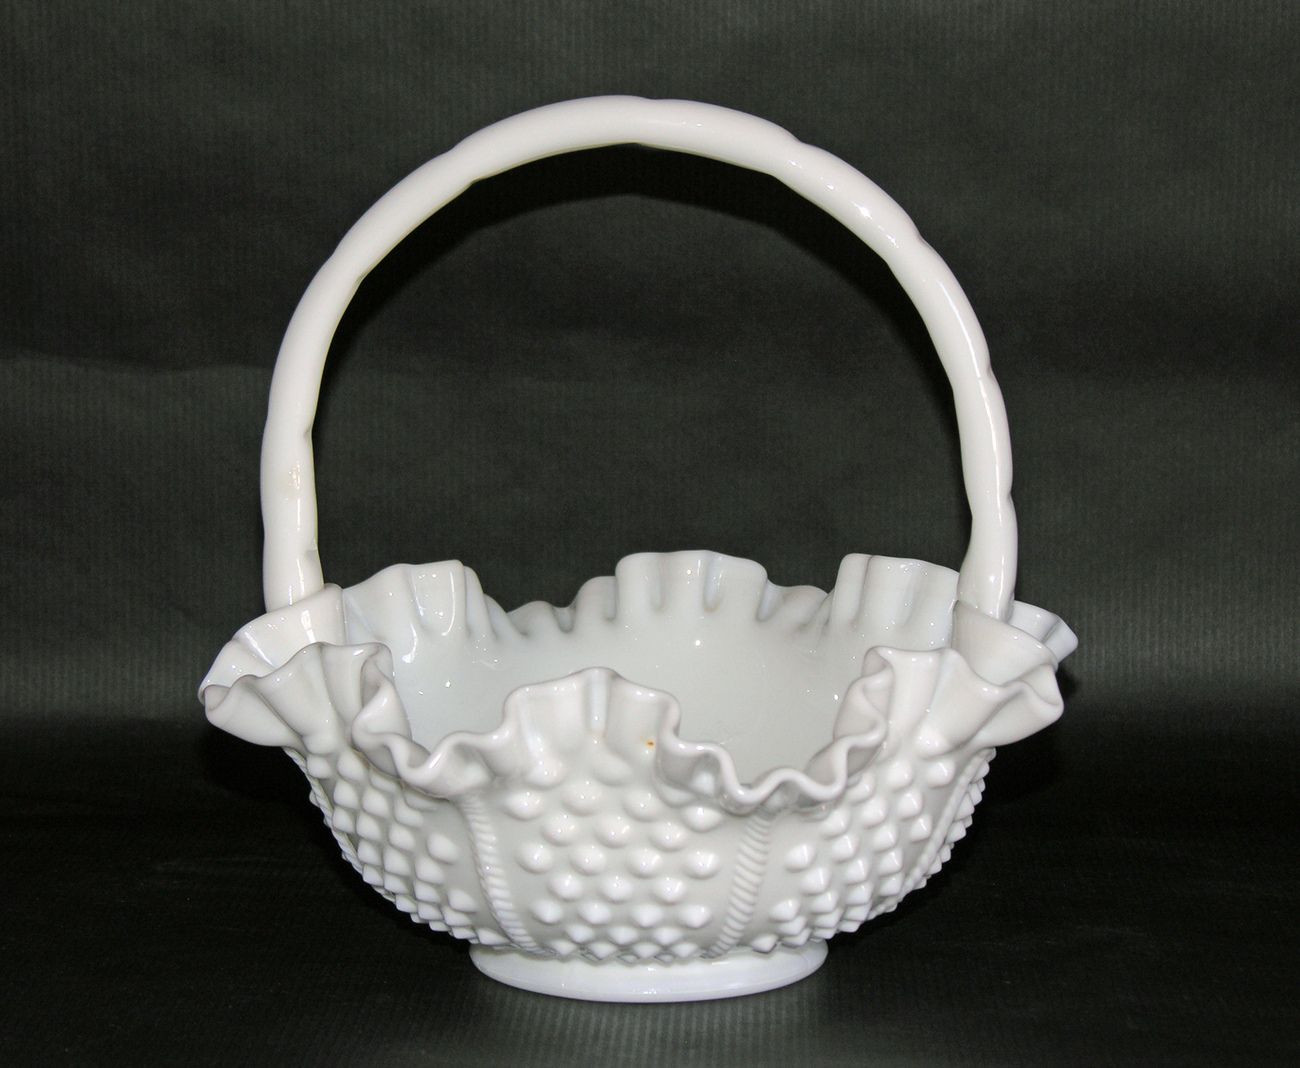 30 Stylish White Milk Glass Hobnail Vase 2024 free download white milk glass hobnail vase of fenton milk glass pricing vintage fenton hobnail milk gl intended for fenton vintage hobnail rope milk glass ruffled basket 8 inch 3638 offered by collectibl